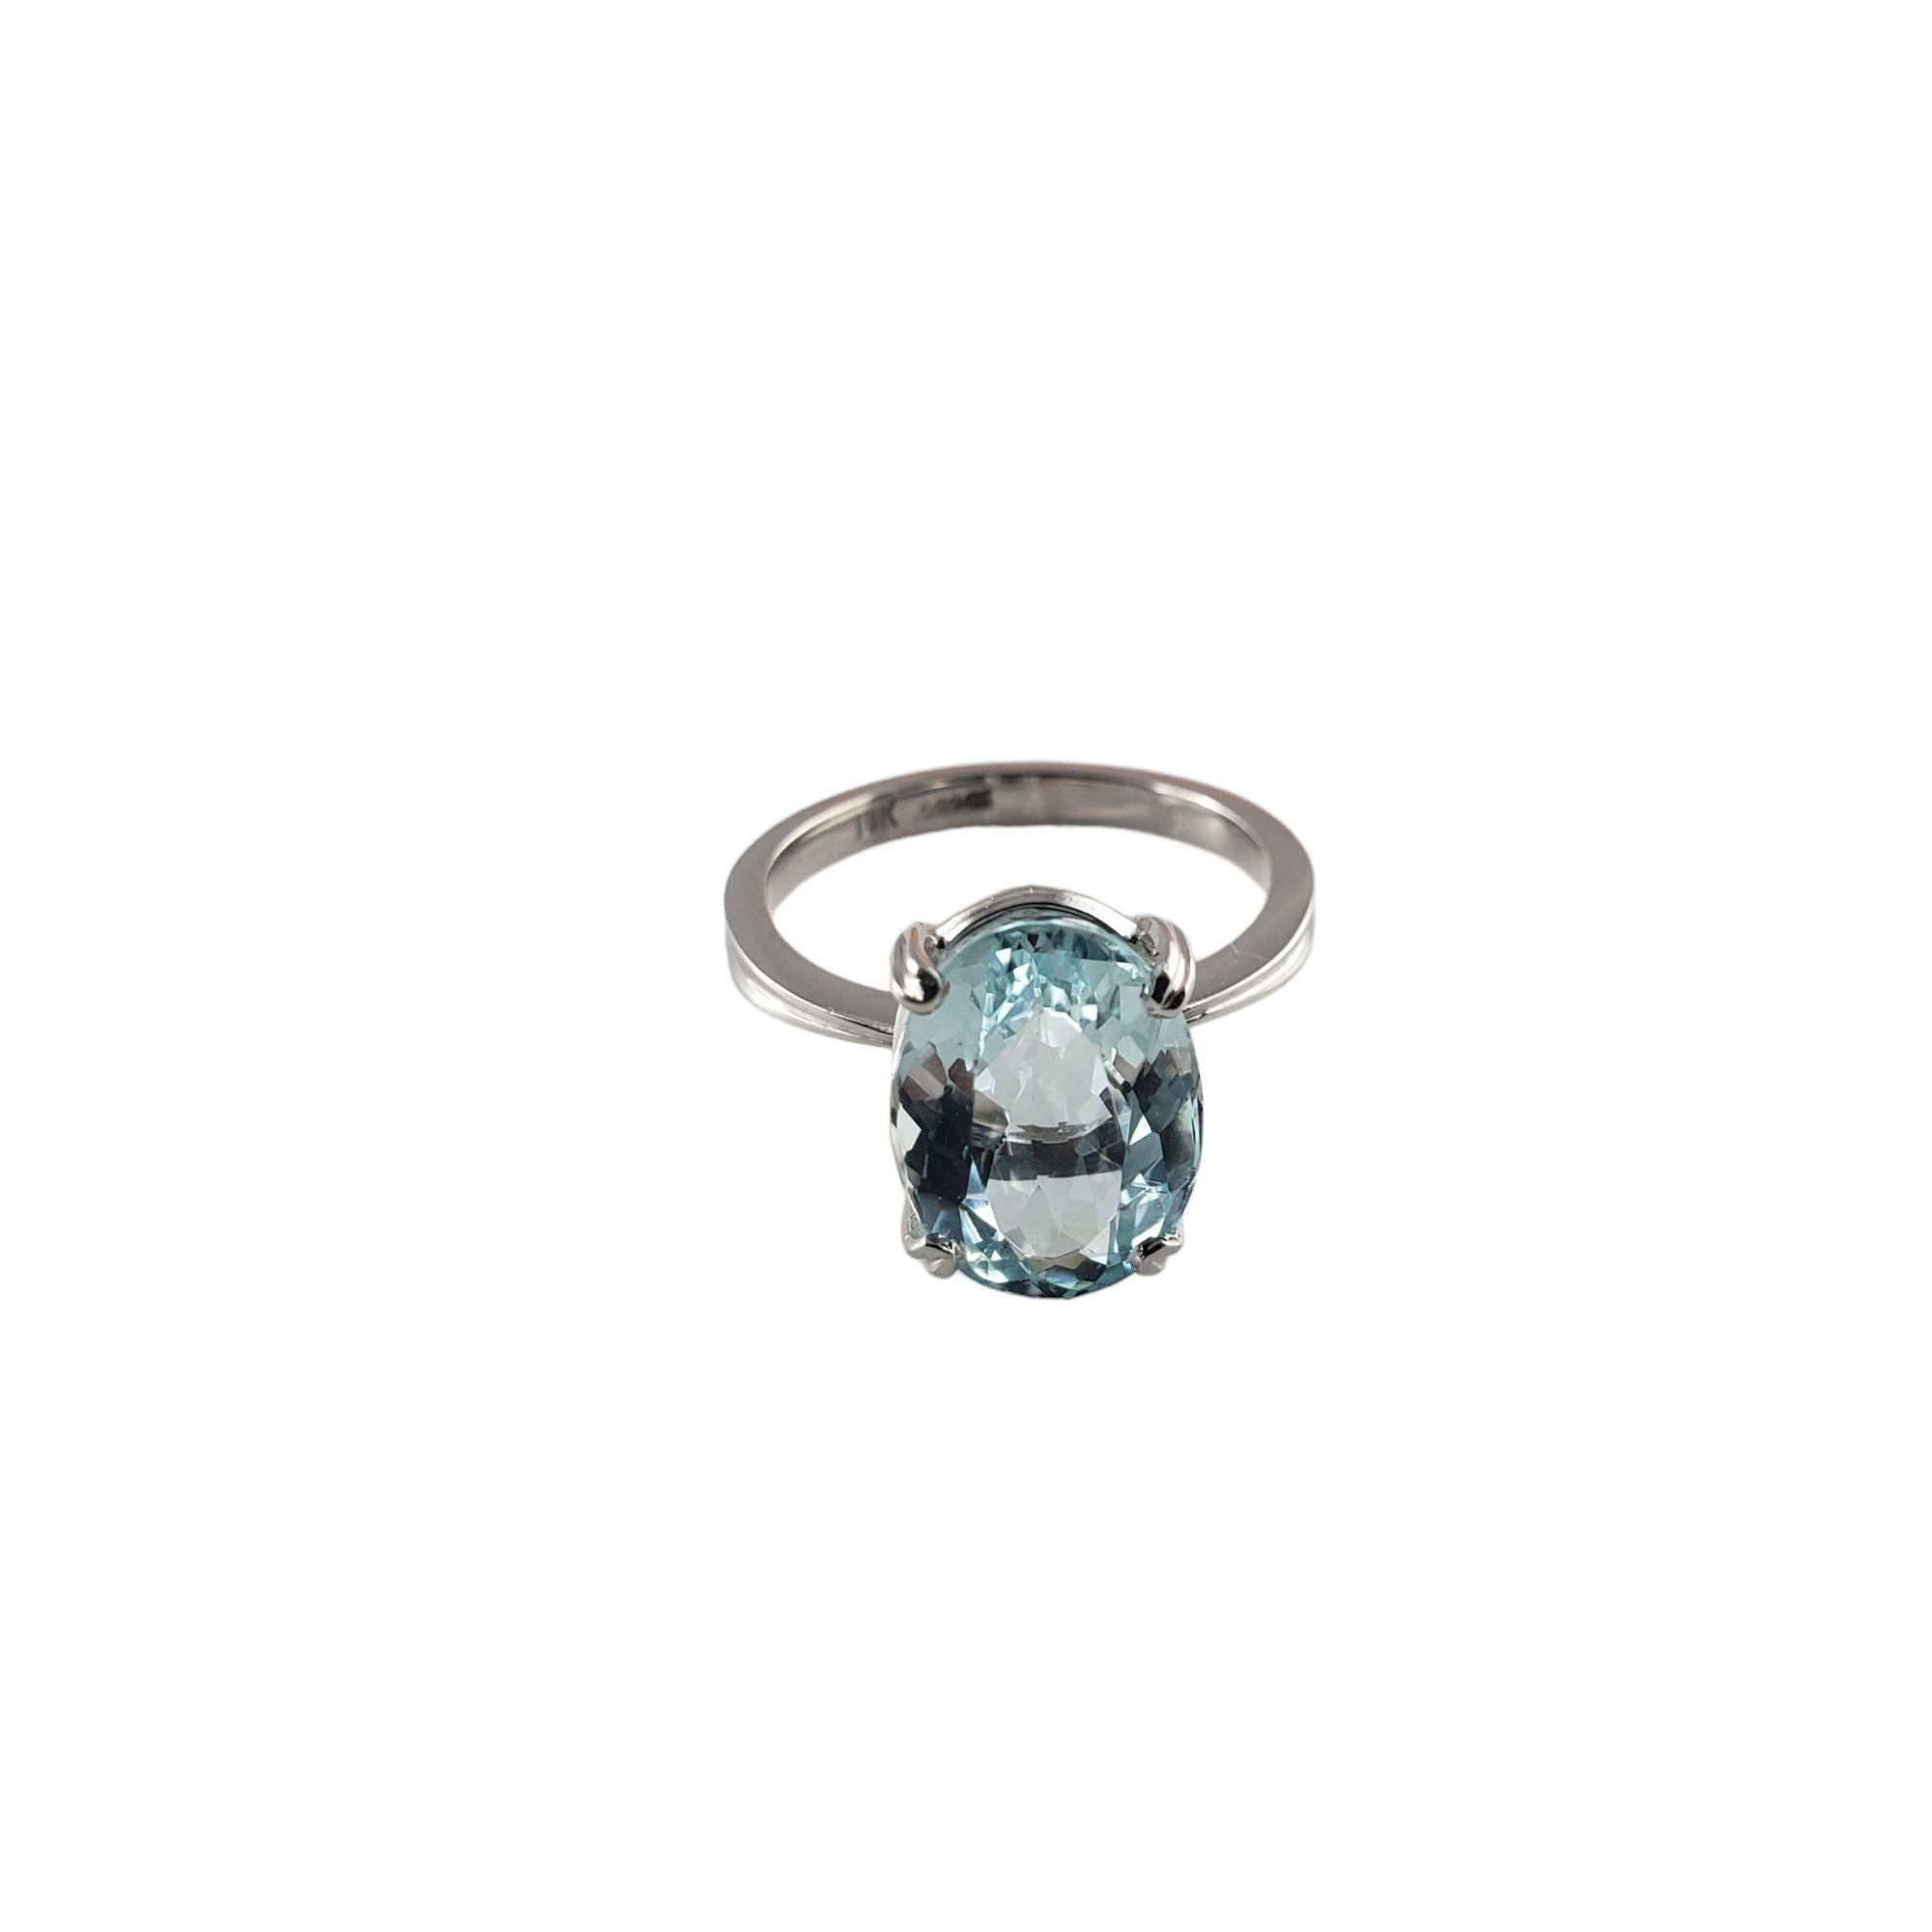 Vintage 18 Karat White Gold Aquamarine Ring Size 5.25 JAGi Certified-

This stunning ring features one oval cut aquamarine (12 mm x 8 mm) set in 18K white gold. Shank: 2 mm.

Aquamarine weight: 3.03 ct.

Ring Size: 5.25

Weight: 2.1 dwt. / 3.4